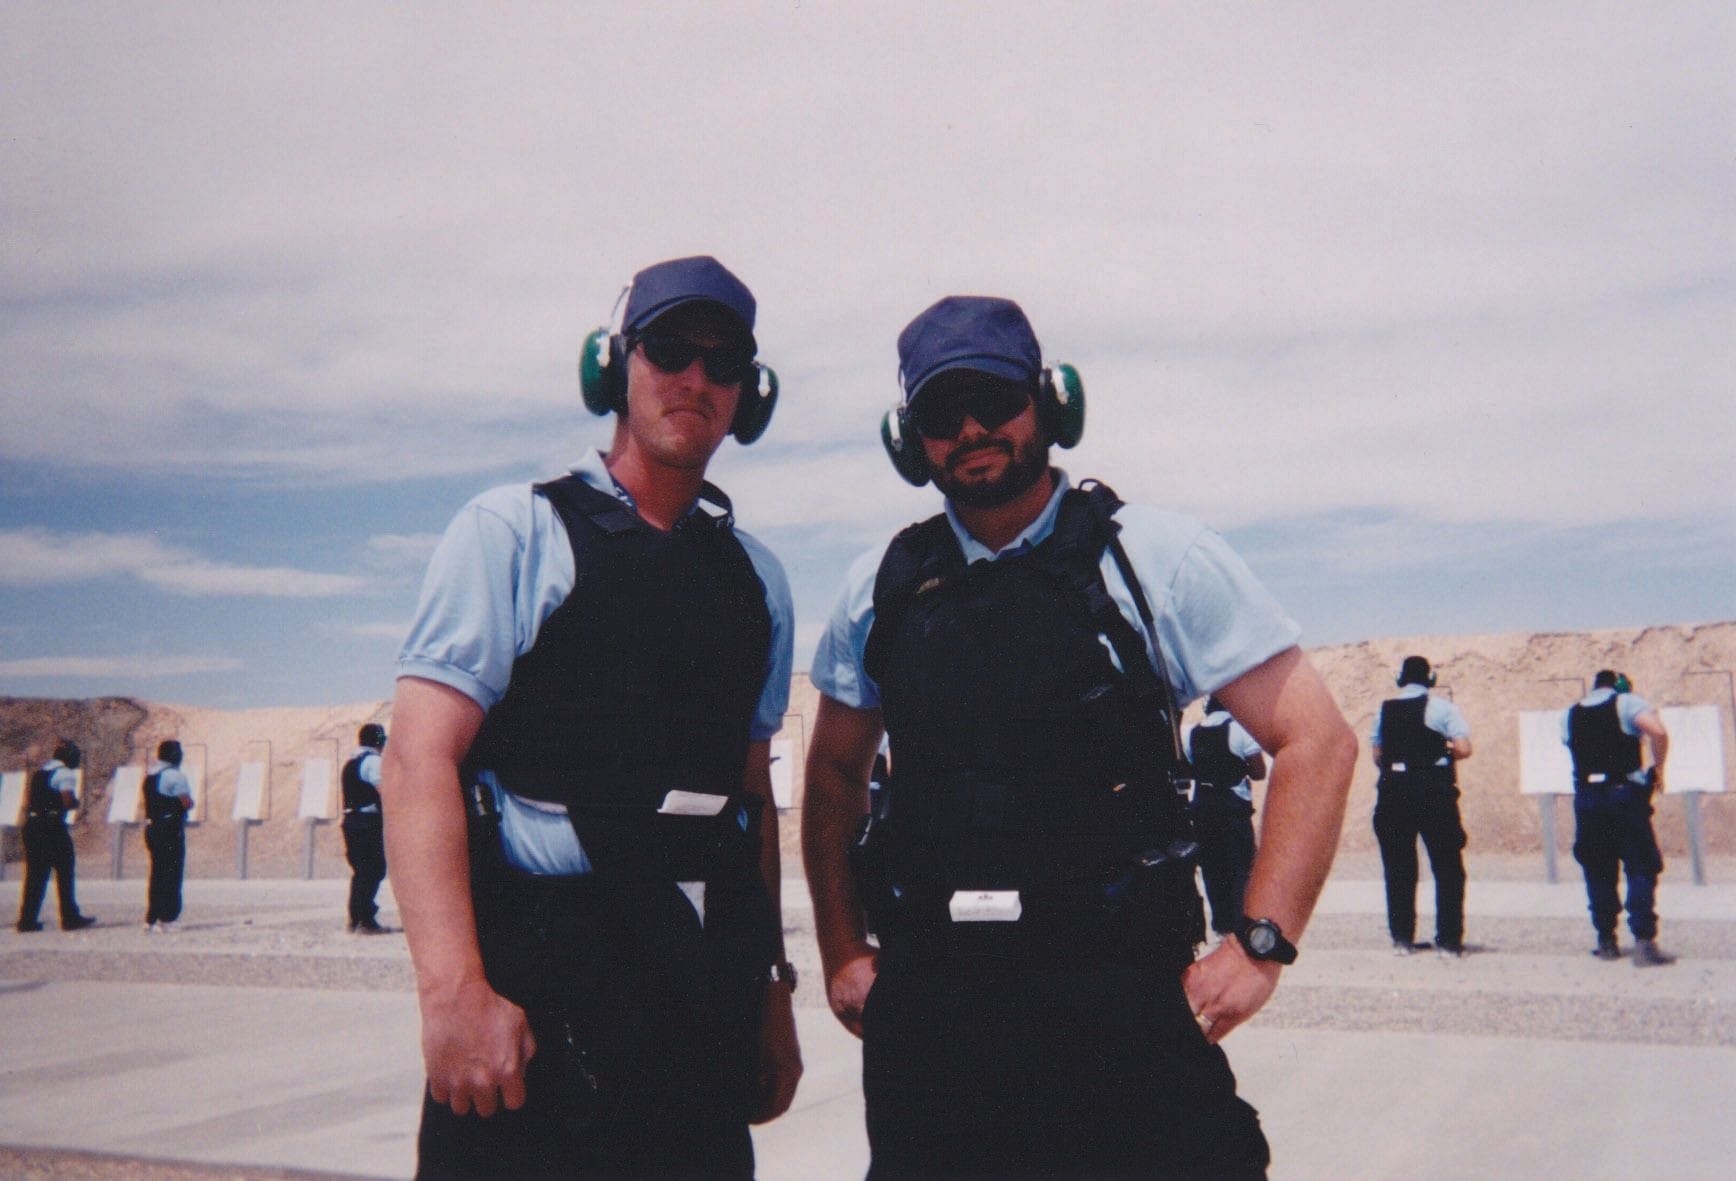 Jim (right) at the Federal Law Enforcement Training Center (FLETC) in New Mexico on a live-fire range training to be a U.S. federal counterterrorist agent.